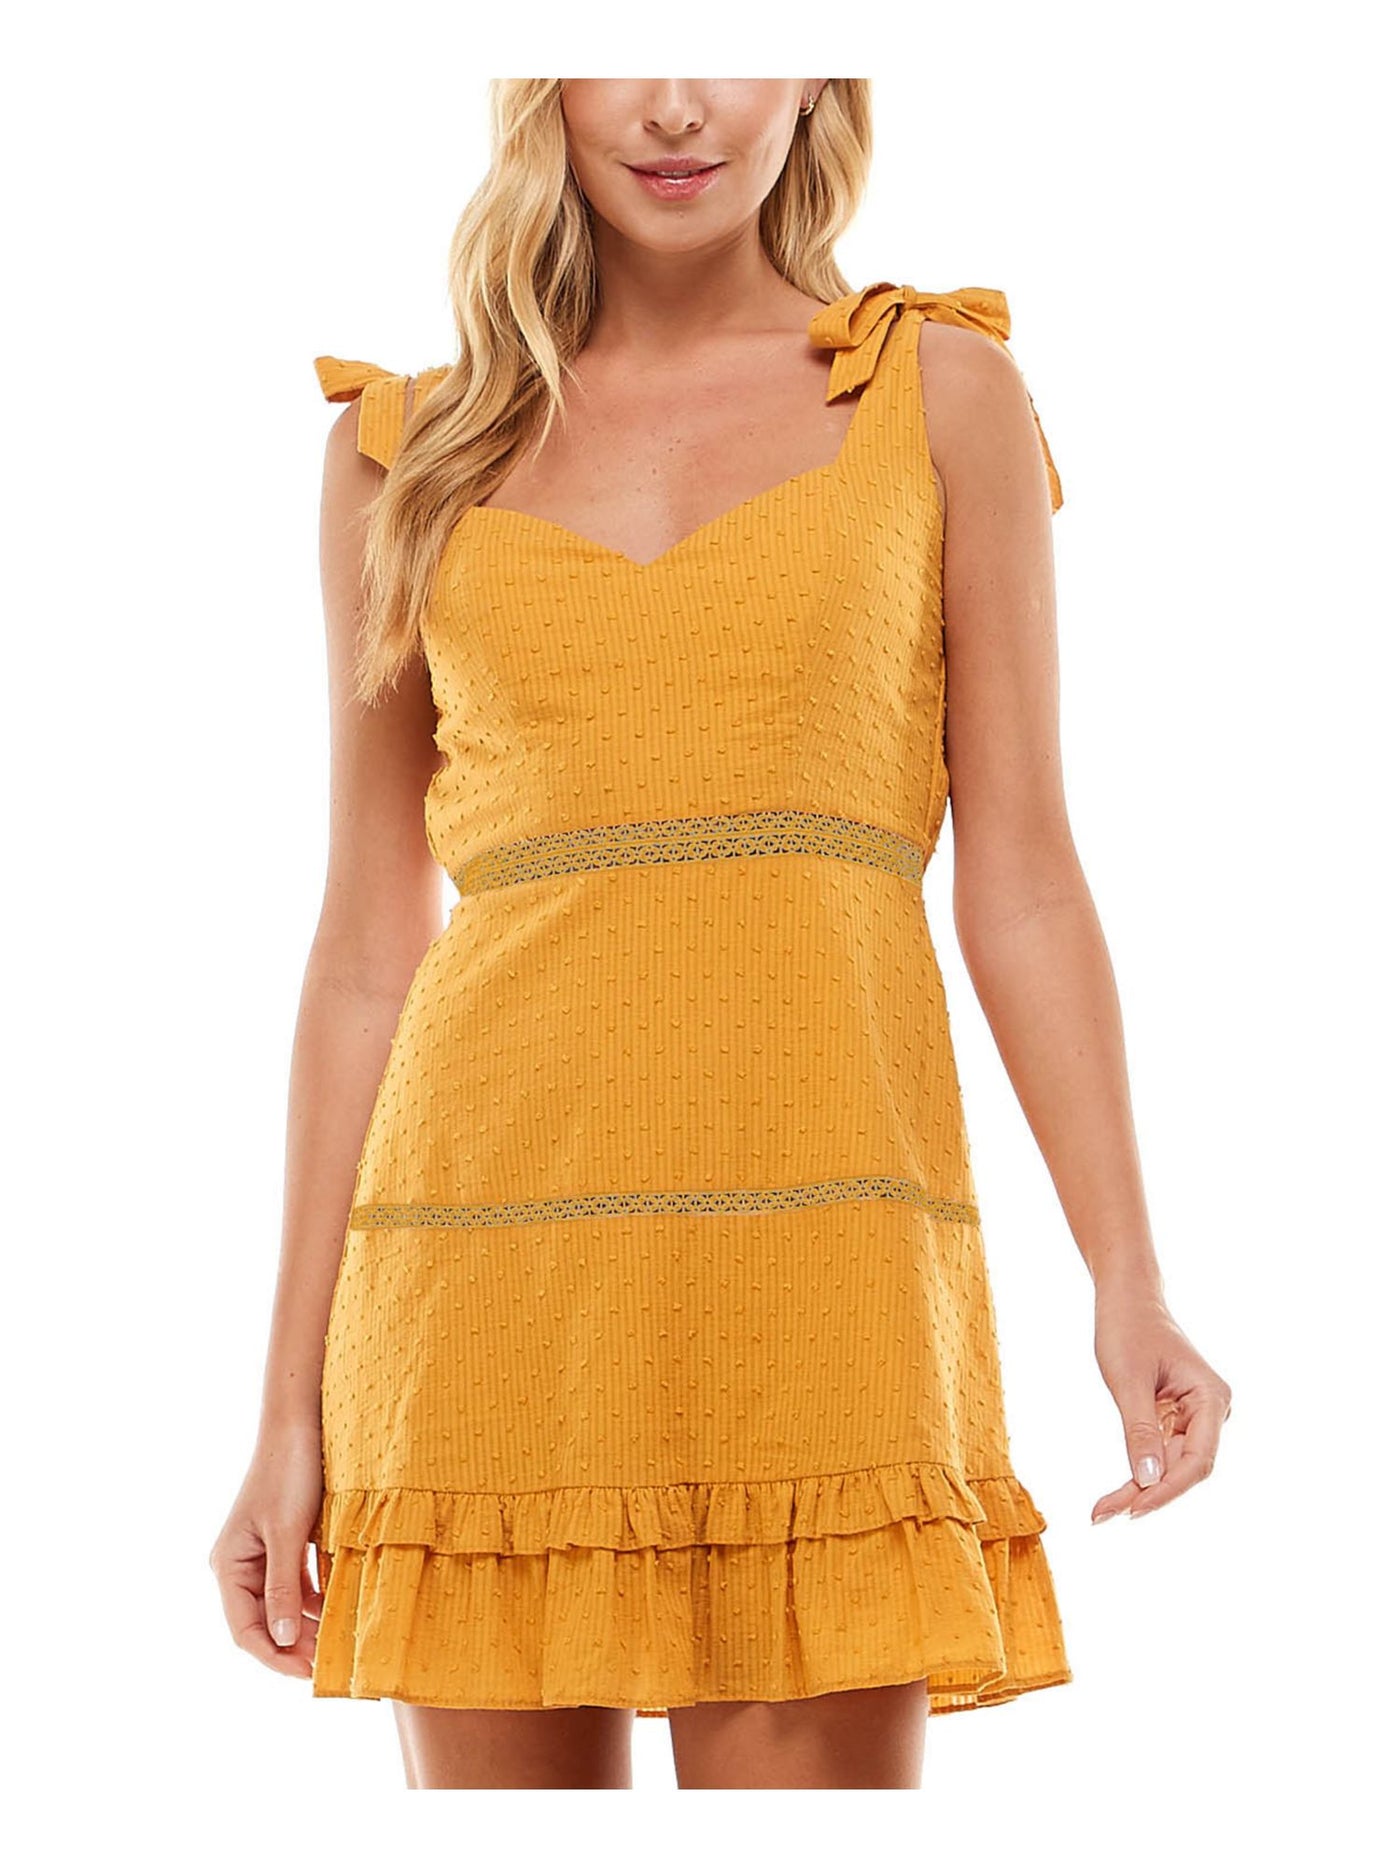 CITY STUDIO Womens Yellow Textured Ruffled Lace Insets Tie At Shoulder Sleeveless Sweetheart Neckline Mini Fit + Flare Dress Juniors S